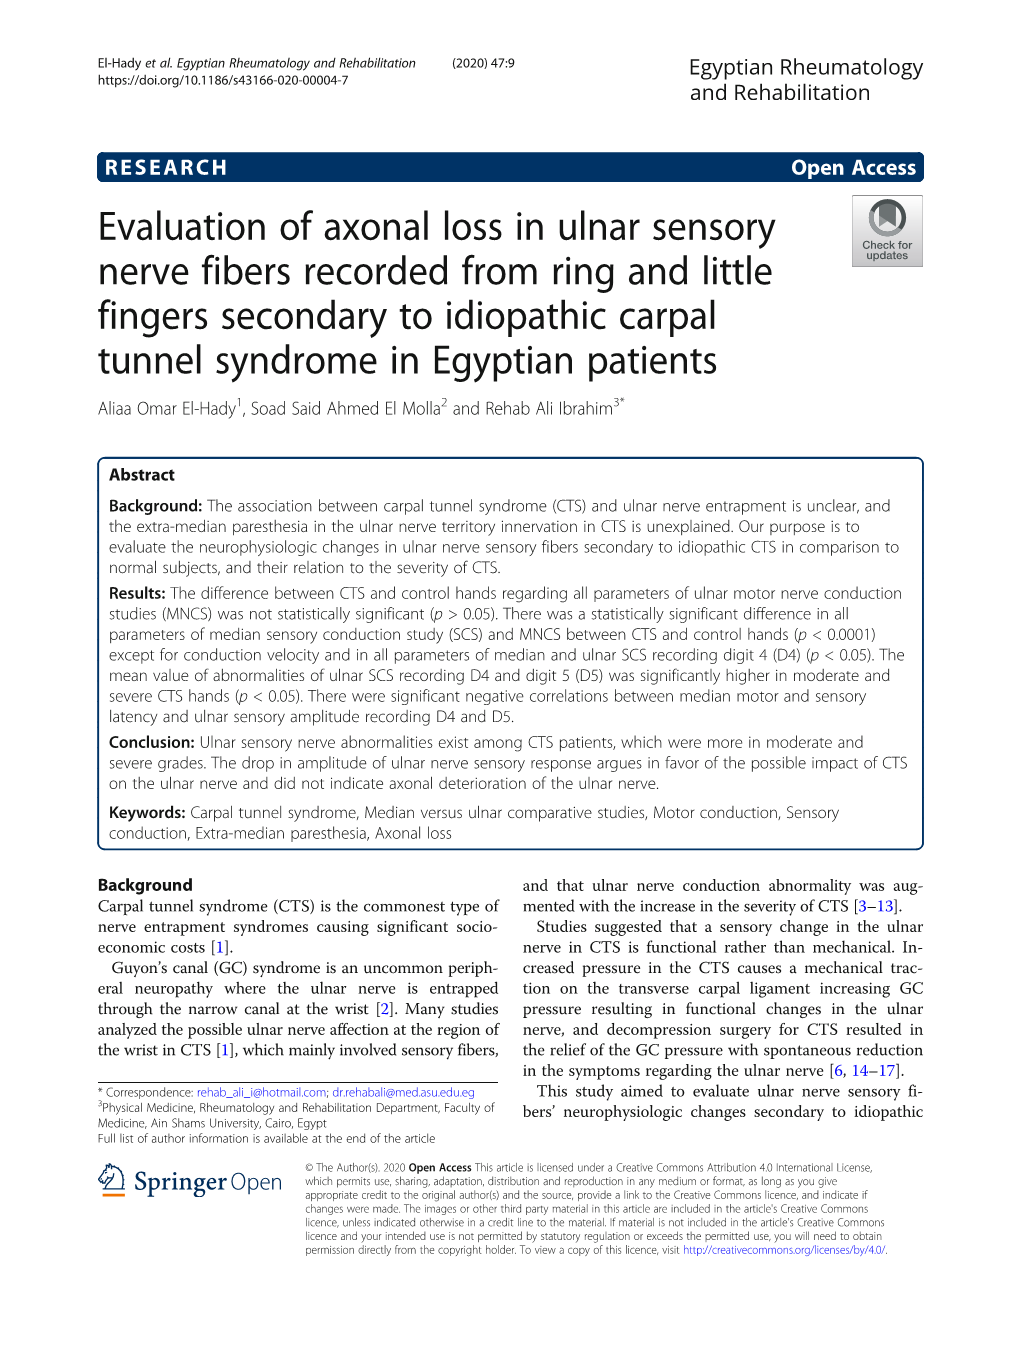 Evaluation of Axonal Loss in Ulnar Sensory Nerve Fibers Recorded from Ring and Little Fingers Secondary to Idiopathic Carpal